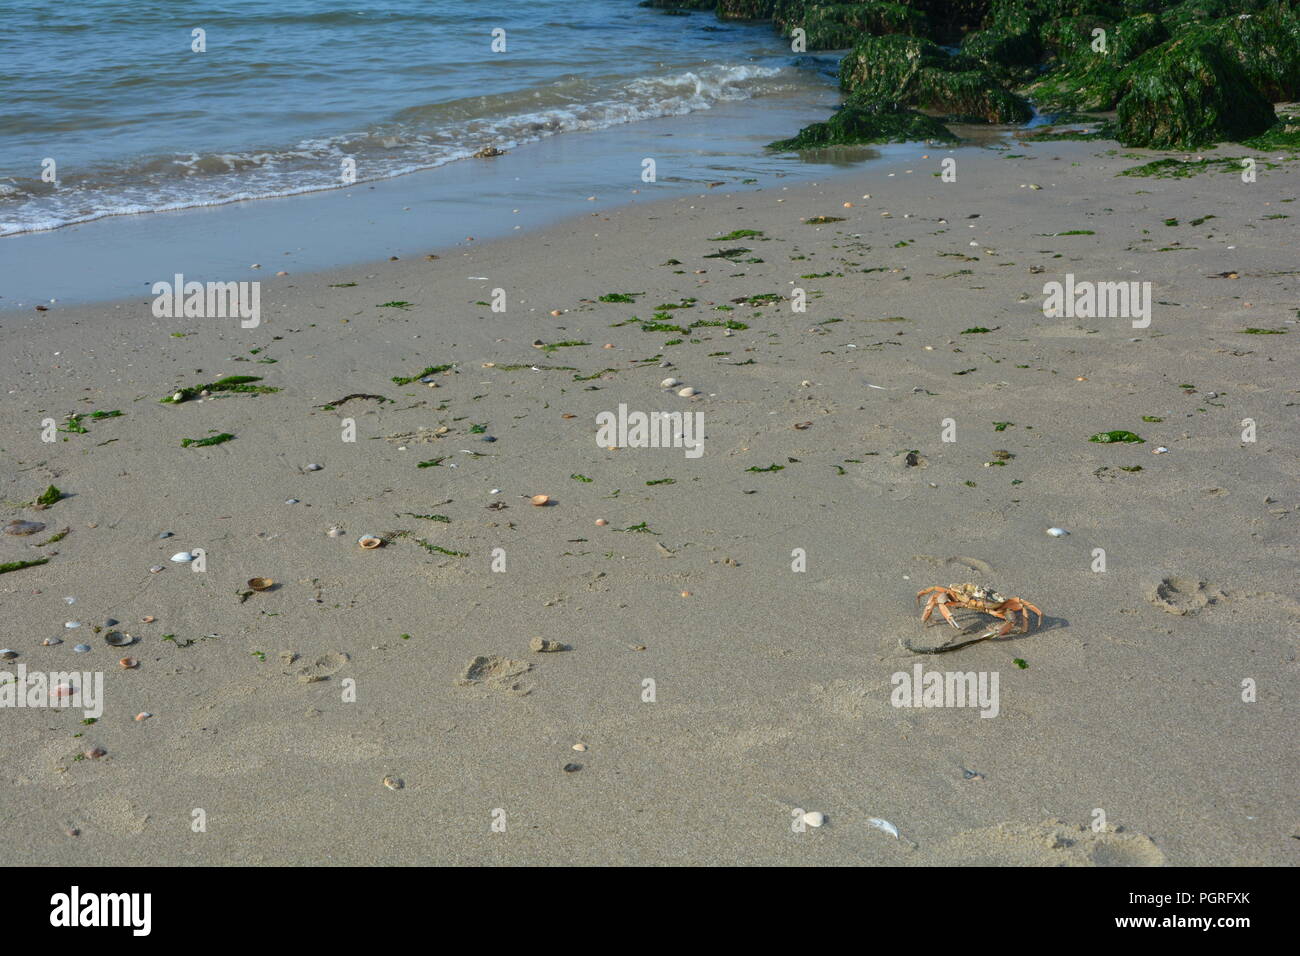 Beach crab on the sandy beach with waves and rocks in the background Stock Photo